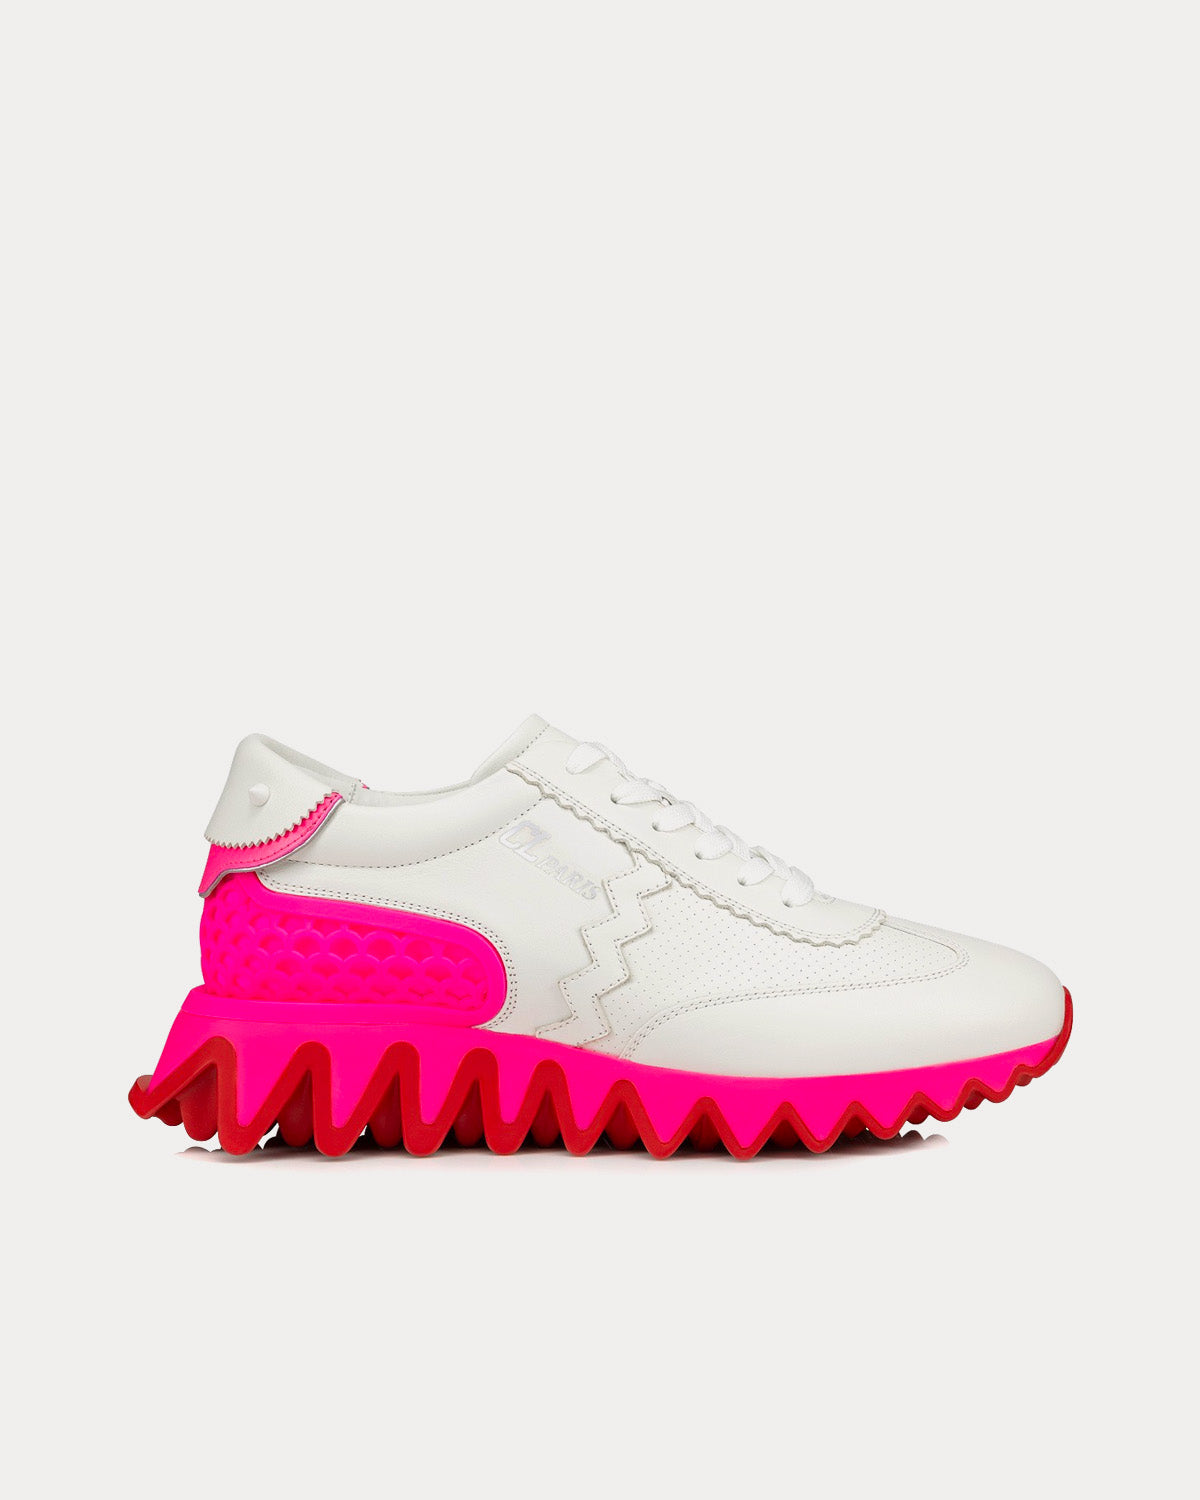 Christian Louboutin Pink Patent Leather and Suede Vieira Spikes